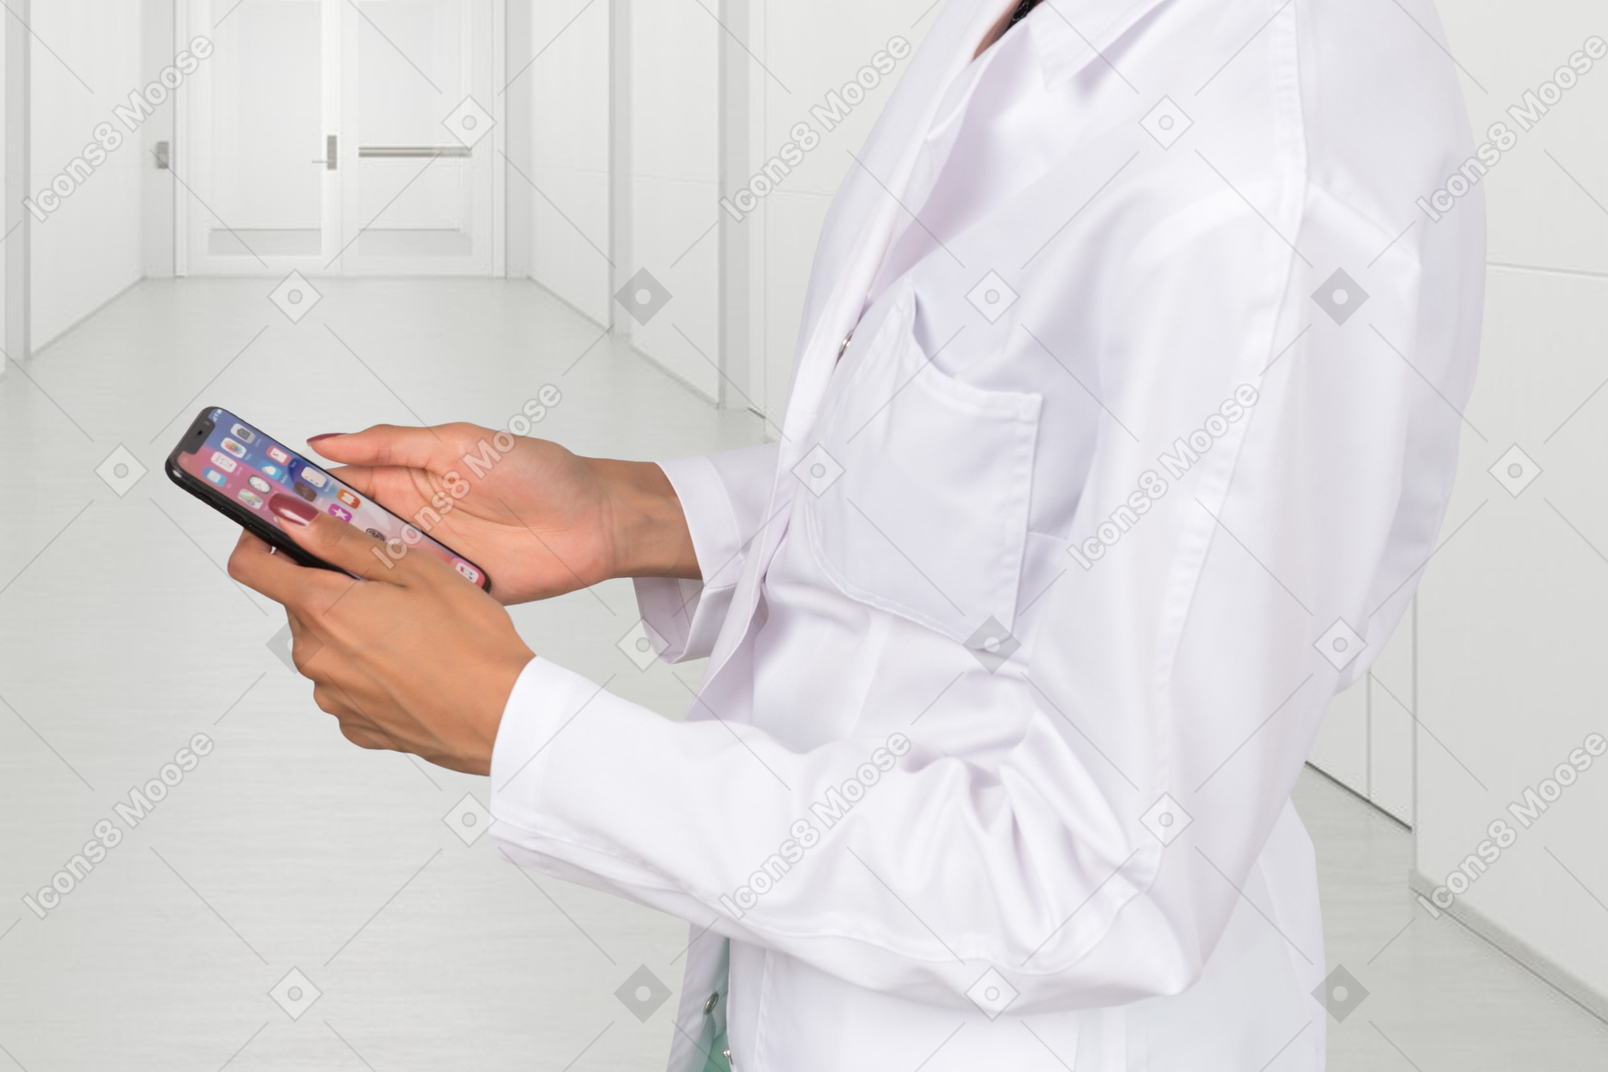 A woman in a white lab coat holding a cell phone